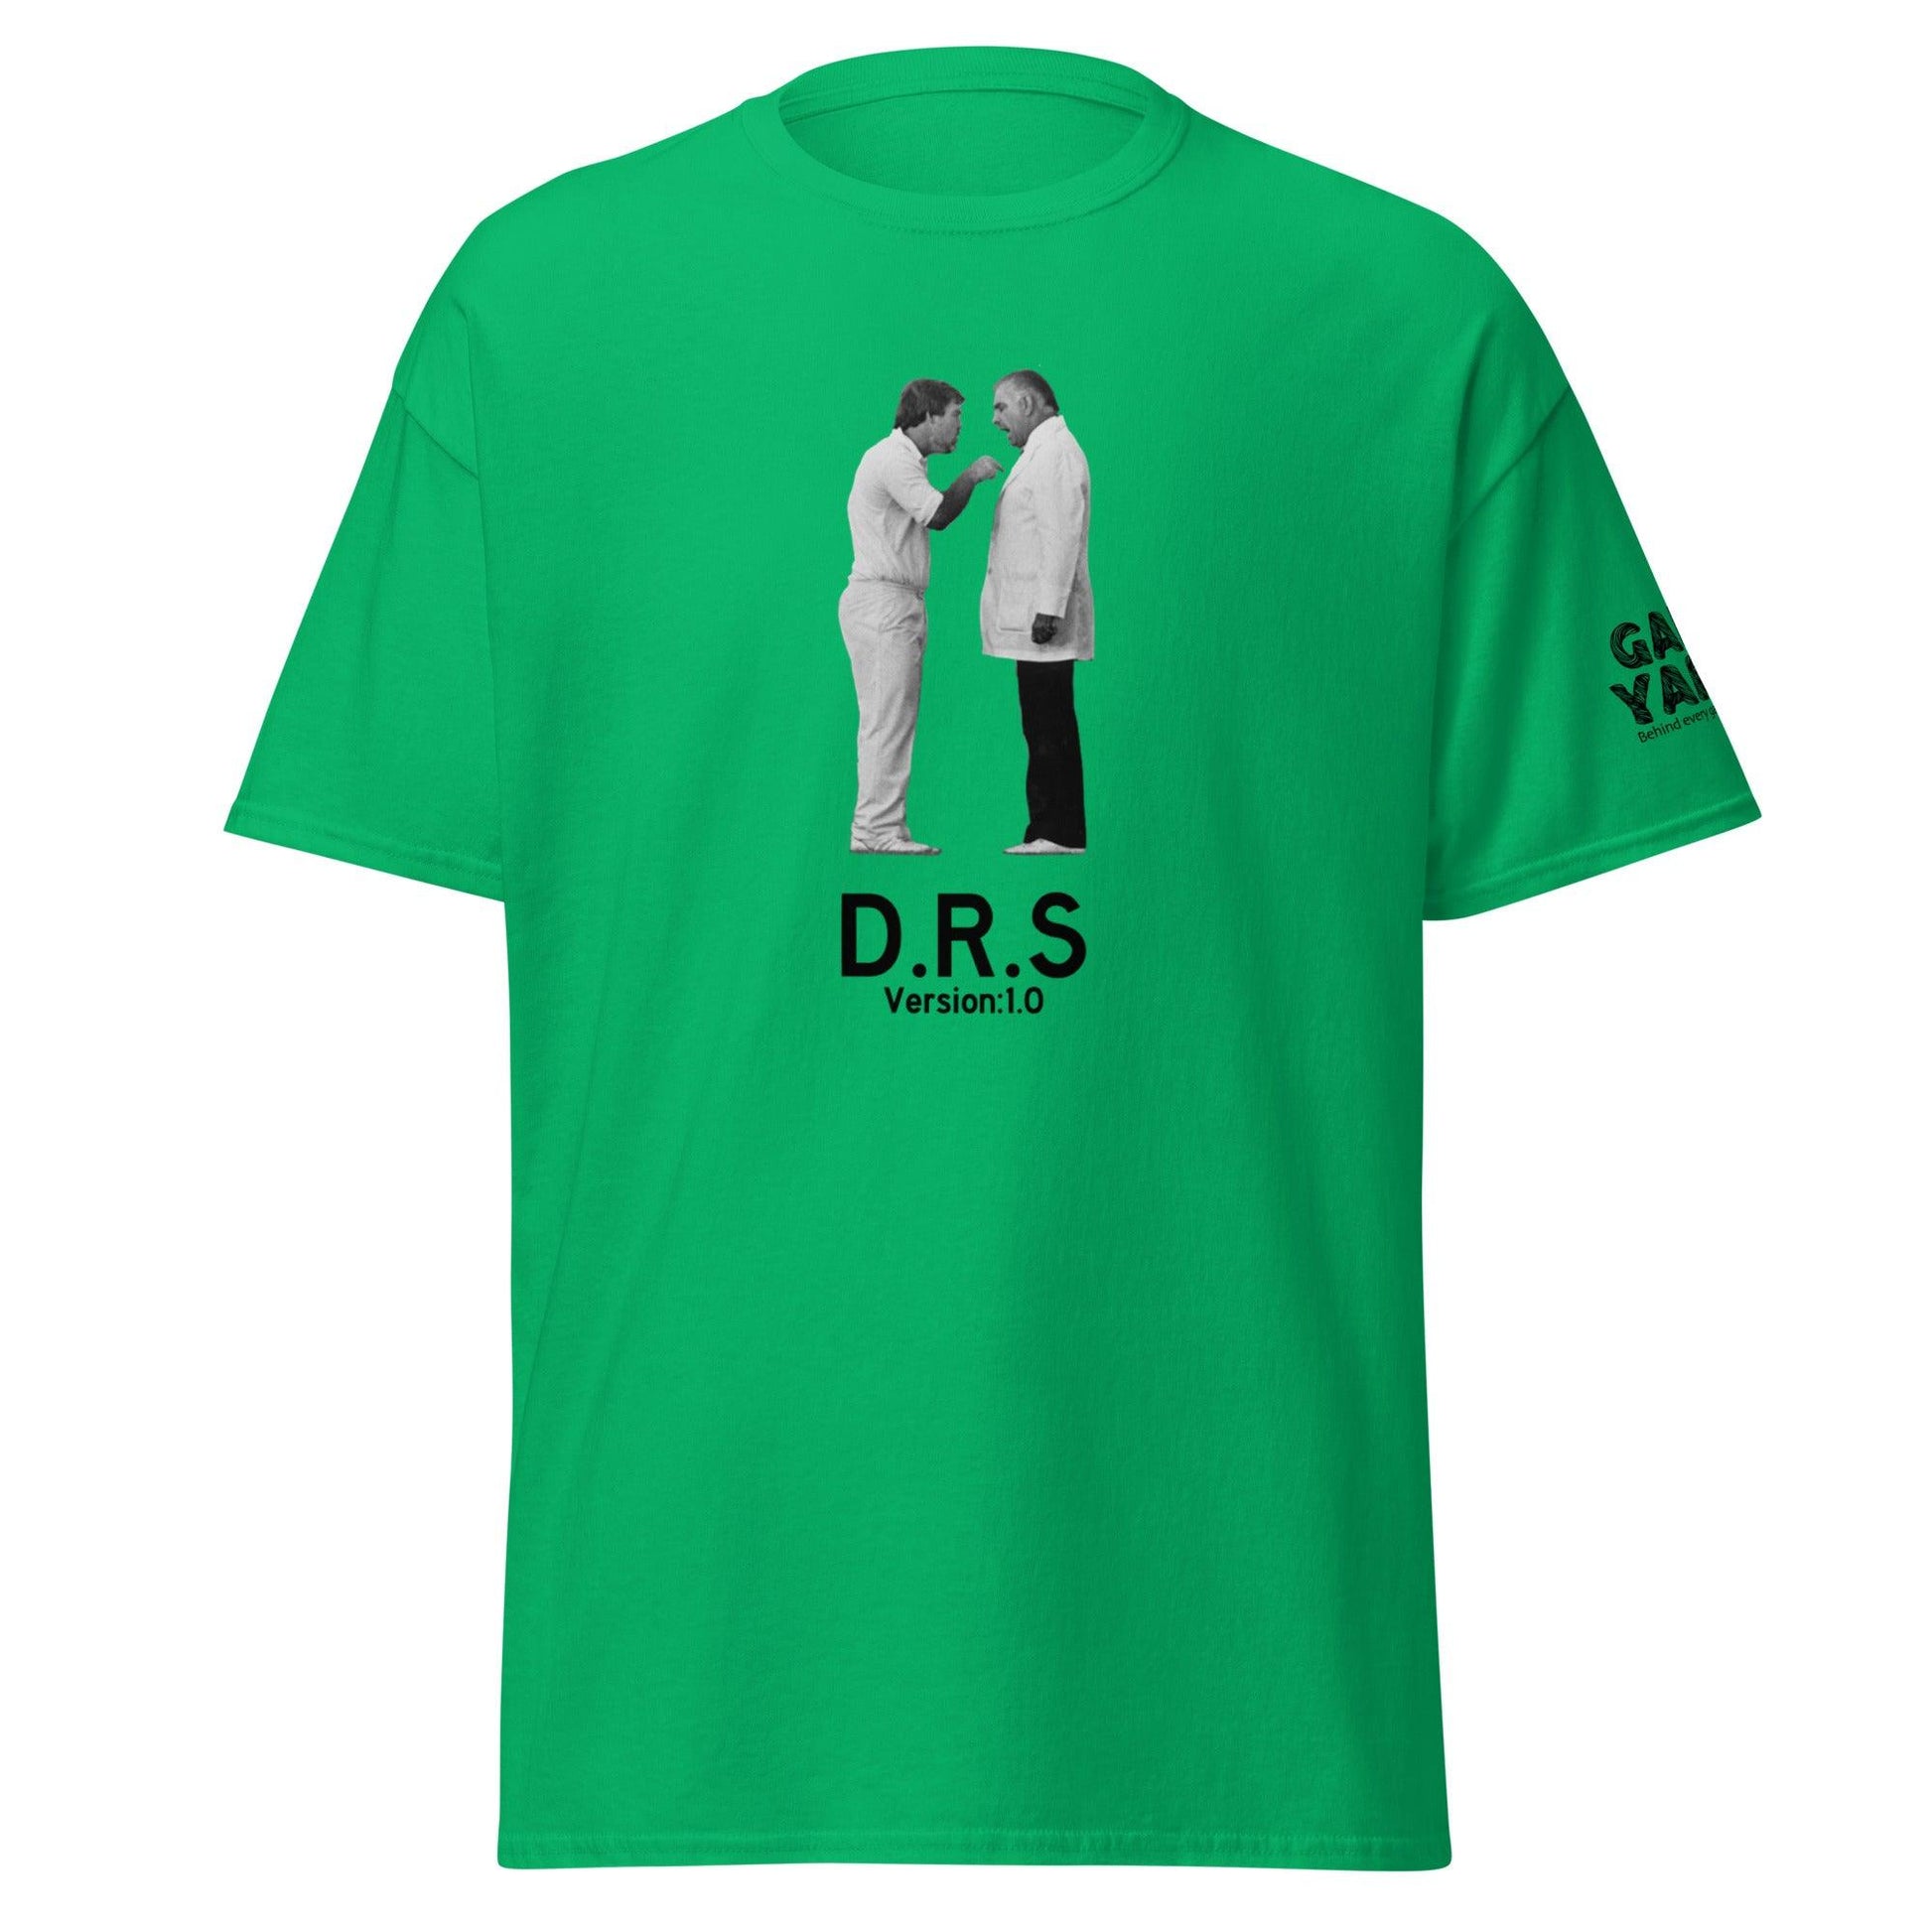 Mike Gatting DRS Version 1.0 t-shirt by Game Yarns